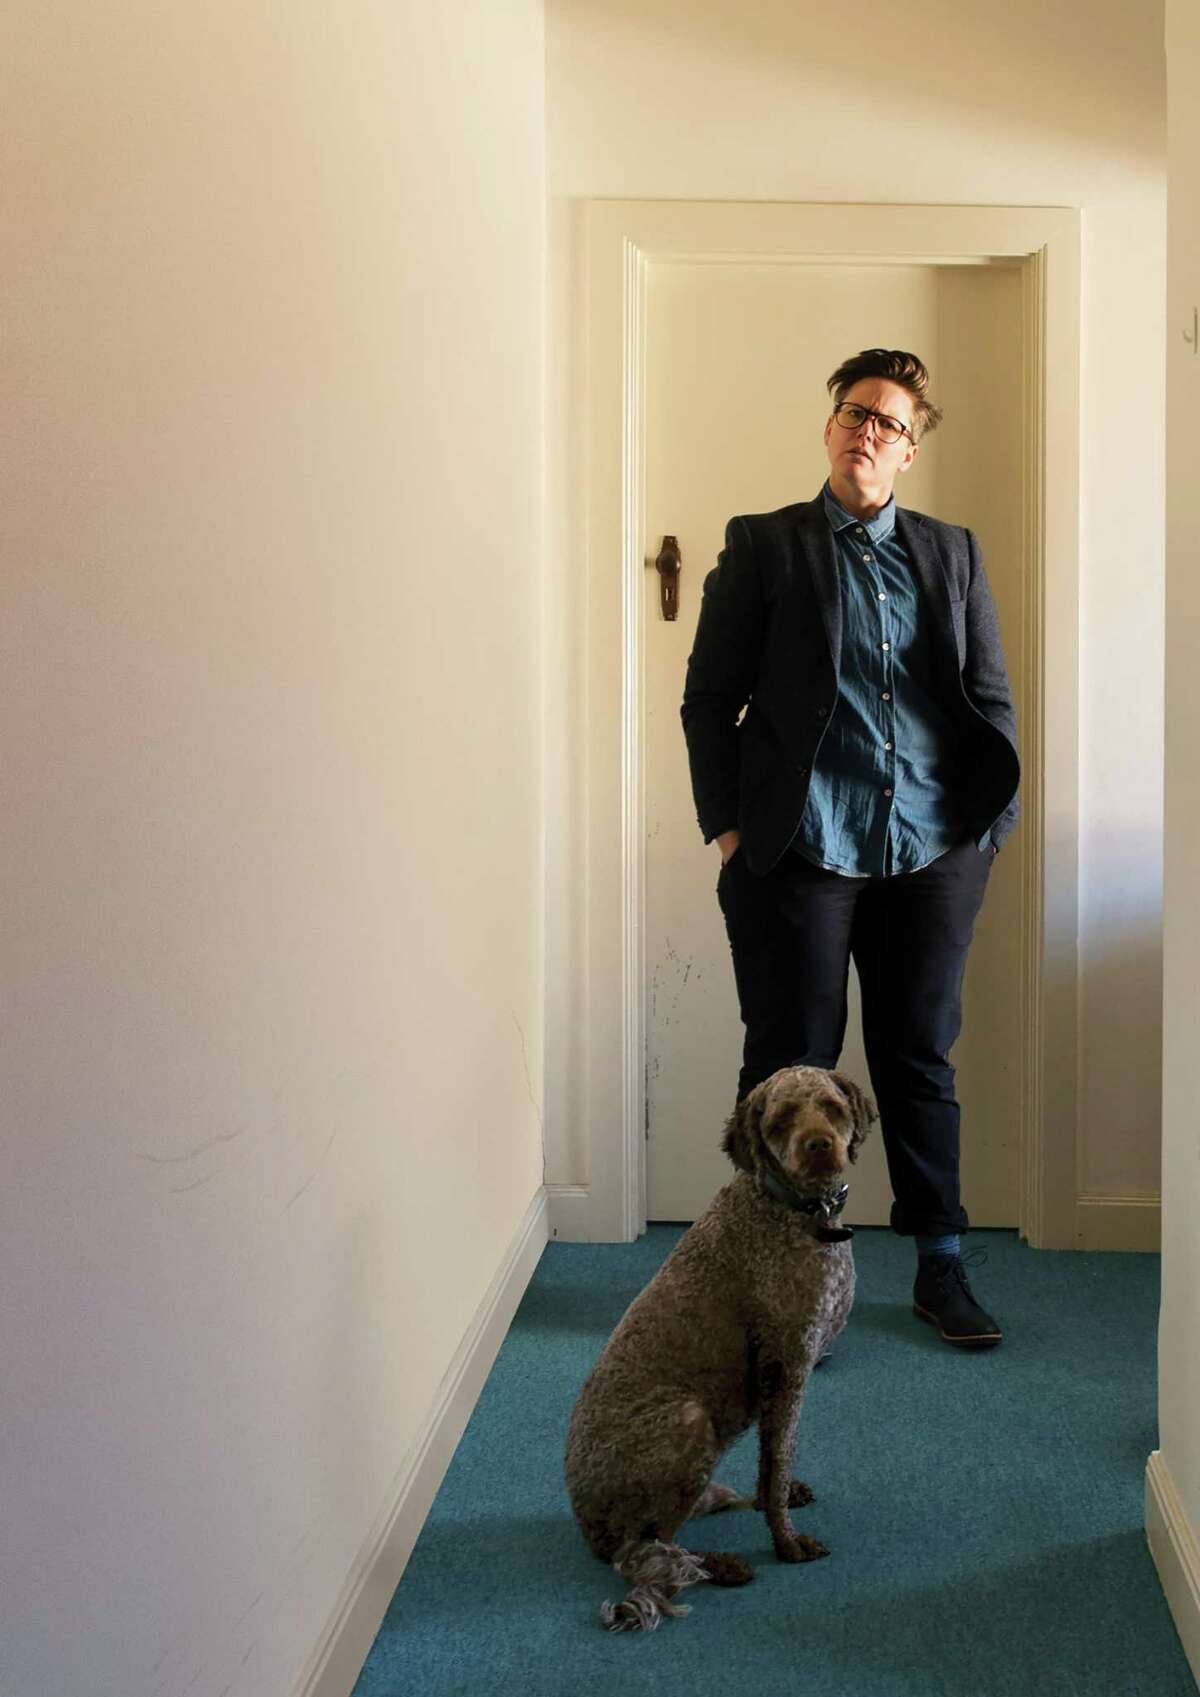 Hannah Gadsby begins the American tour of her new show, "Douglas," at the Palace of Fine Arts Theatre.